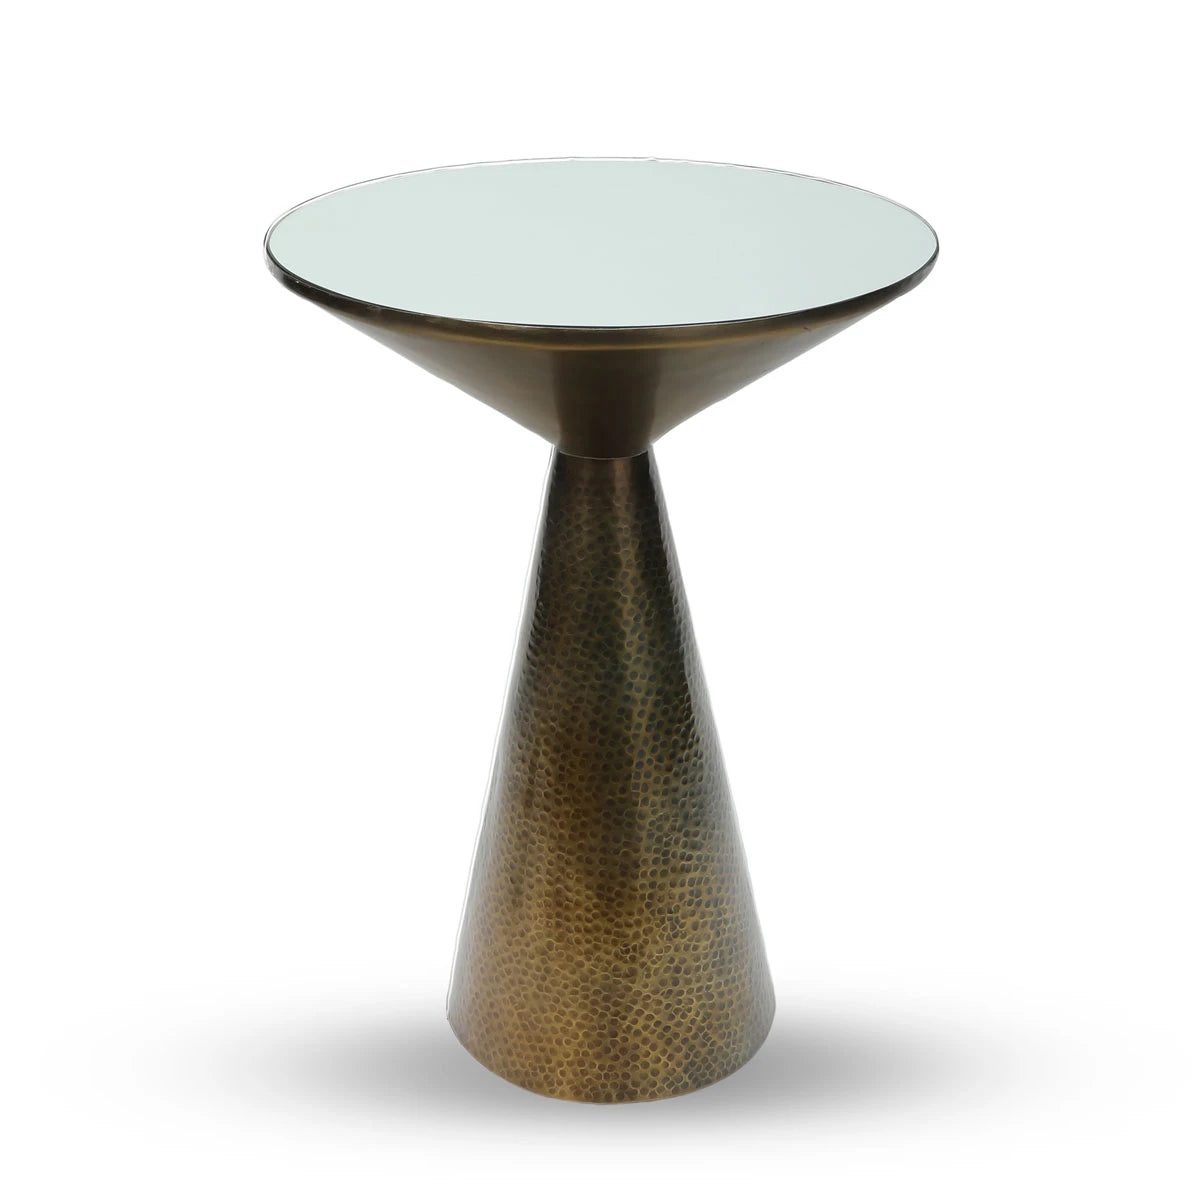 Top Angled View of Hand-Hammered Textured Brass Metal Table with Glass Top